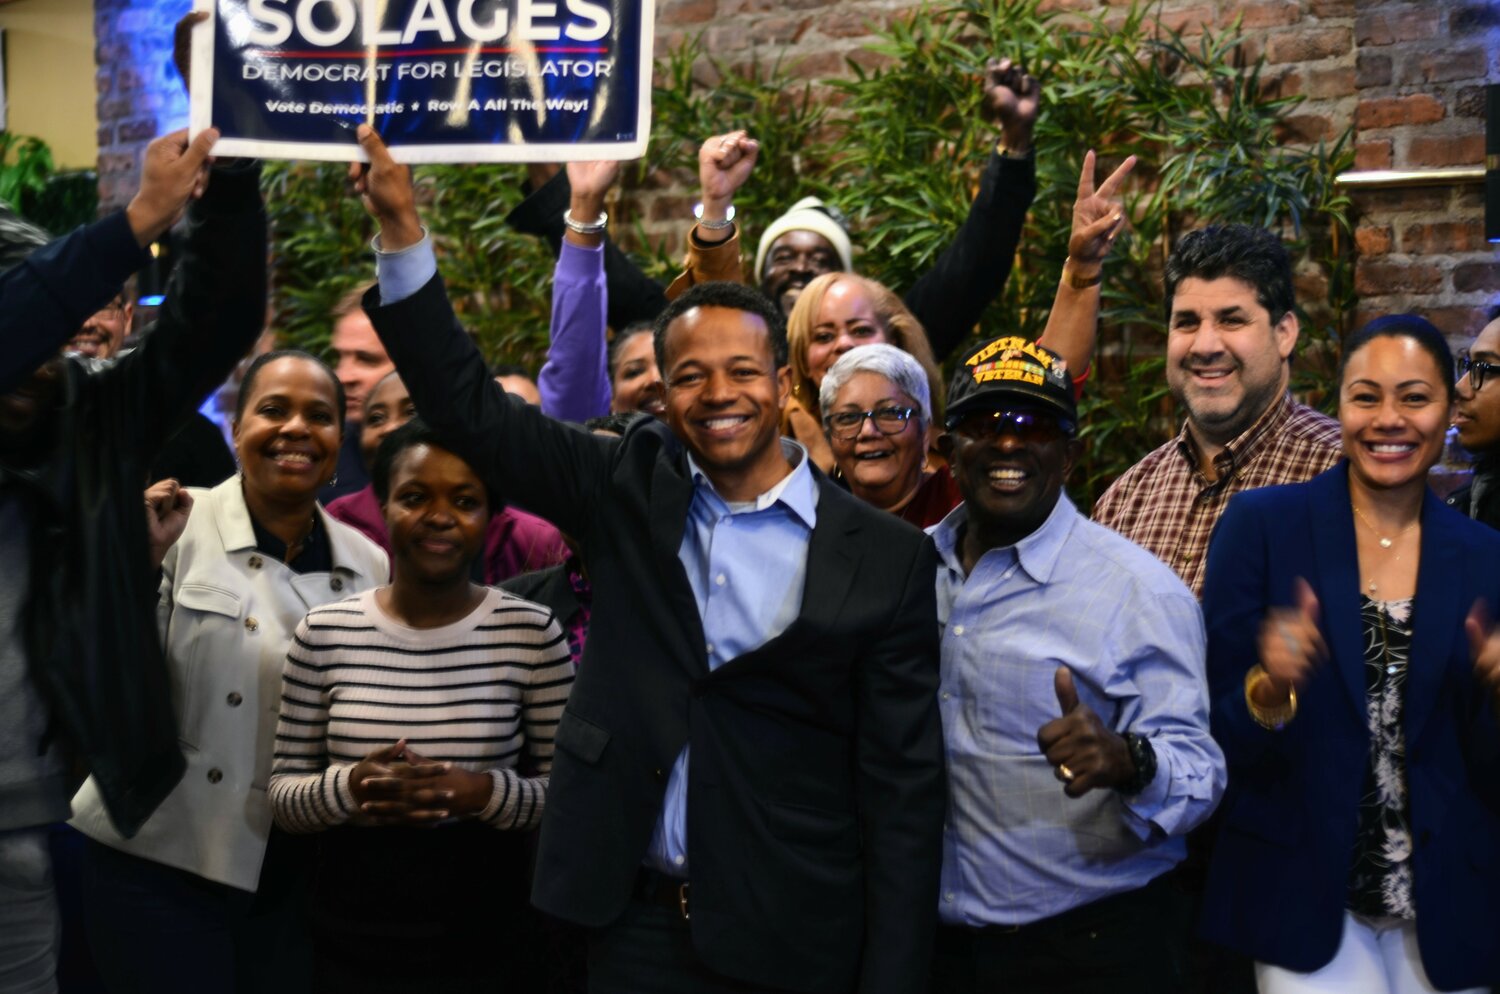 County Legislator Carrié Solages declared victory at a celebratory gathering at Le Spot Café in Elmont as unofficial results from the Nassau County Board of Elections showed him leading with 62 percent of the vote as of midnight Wednesday.